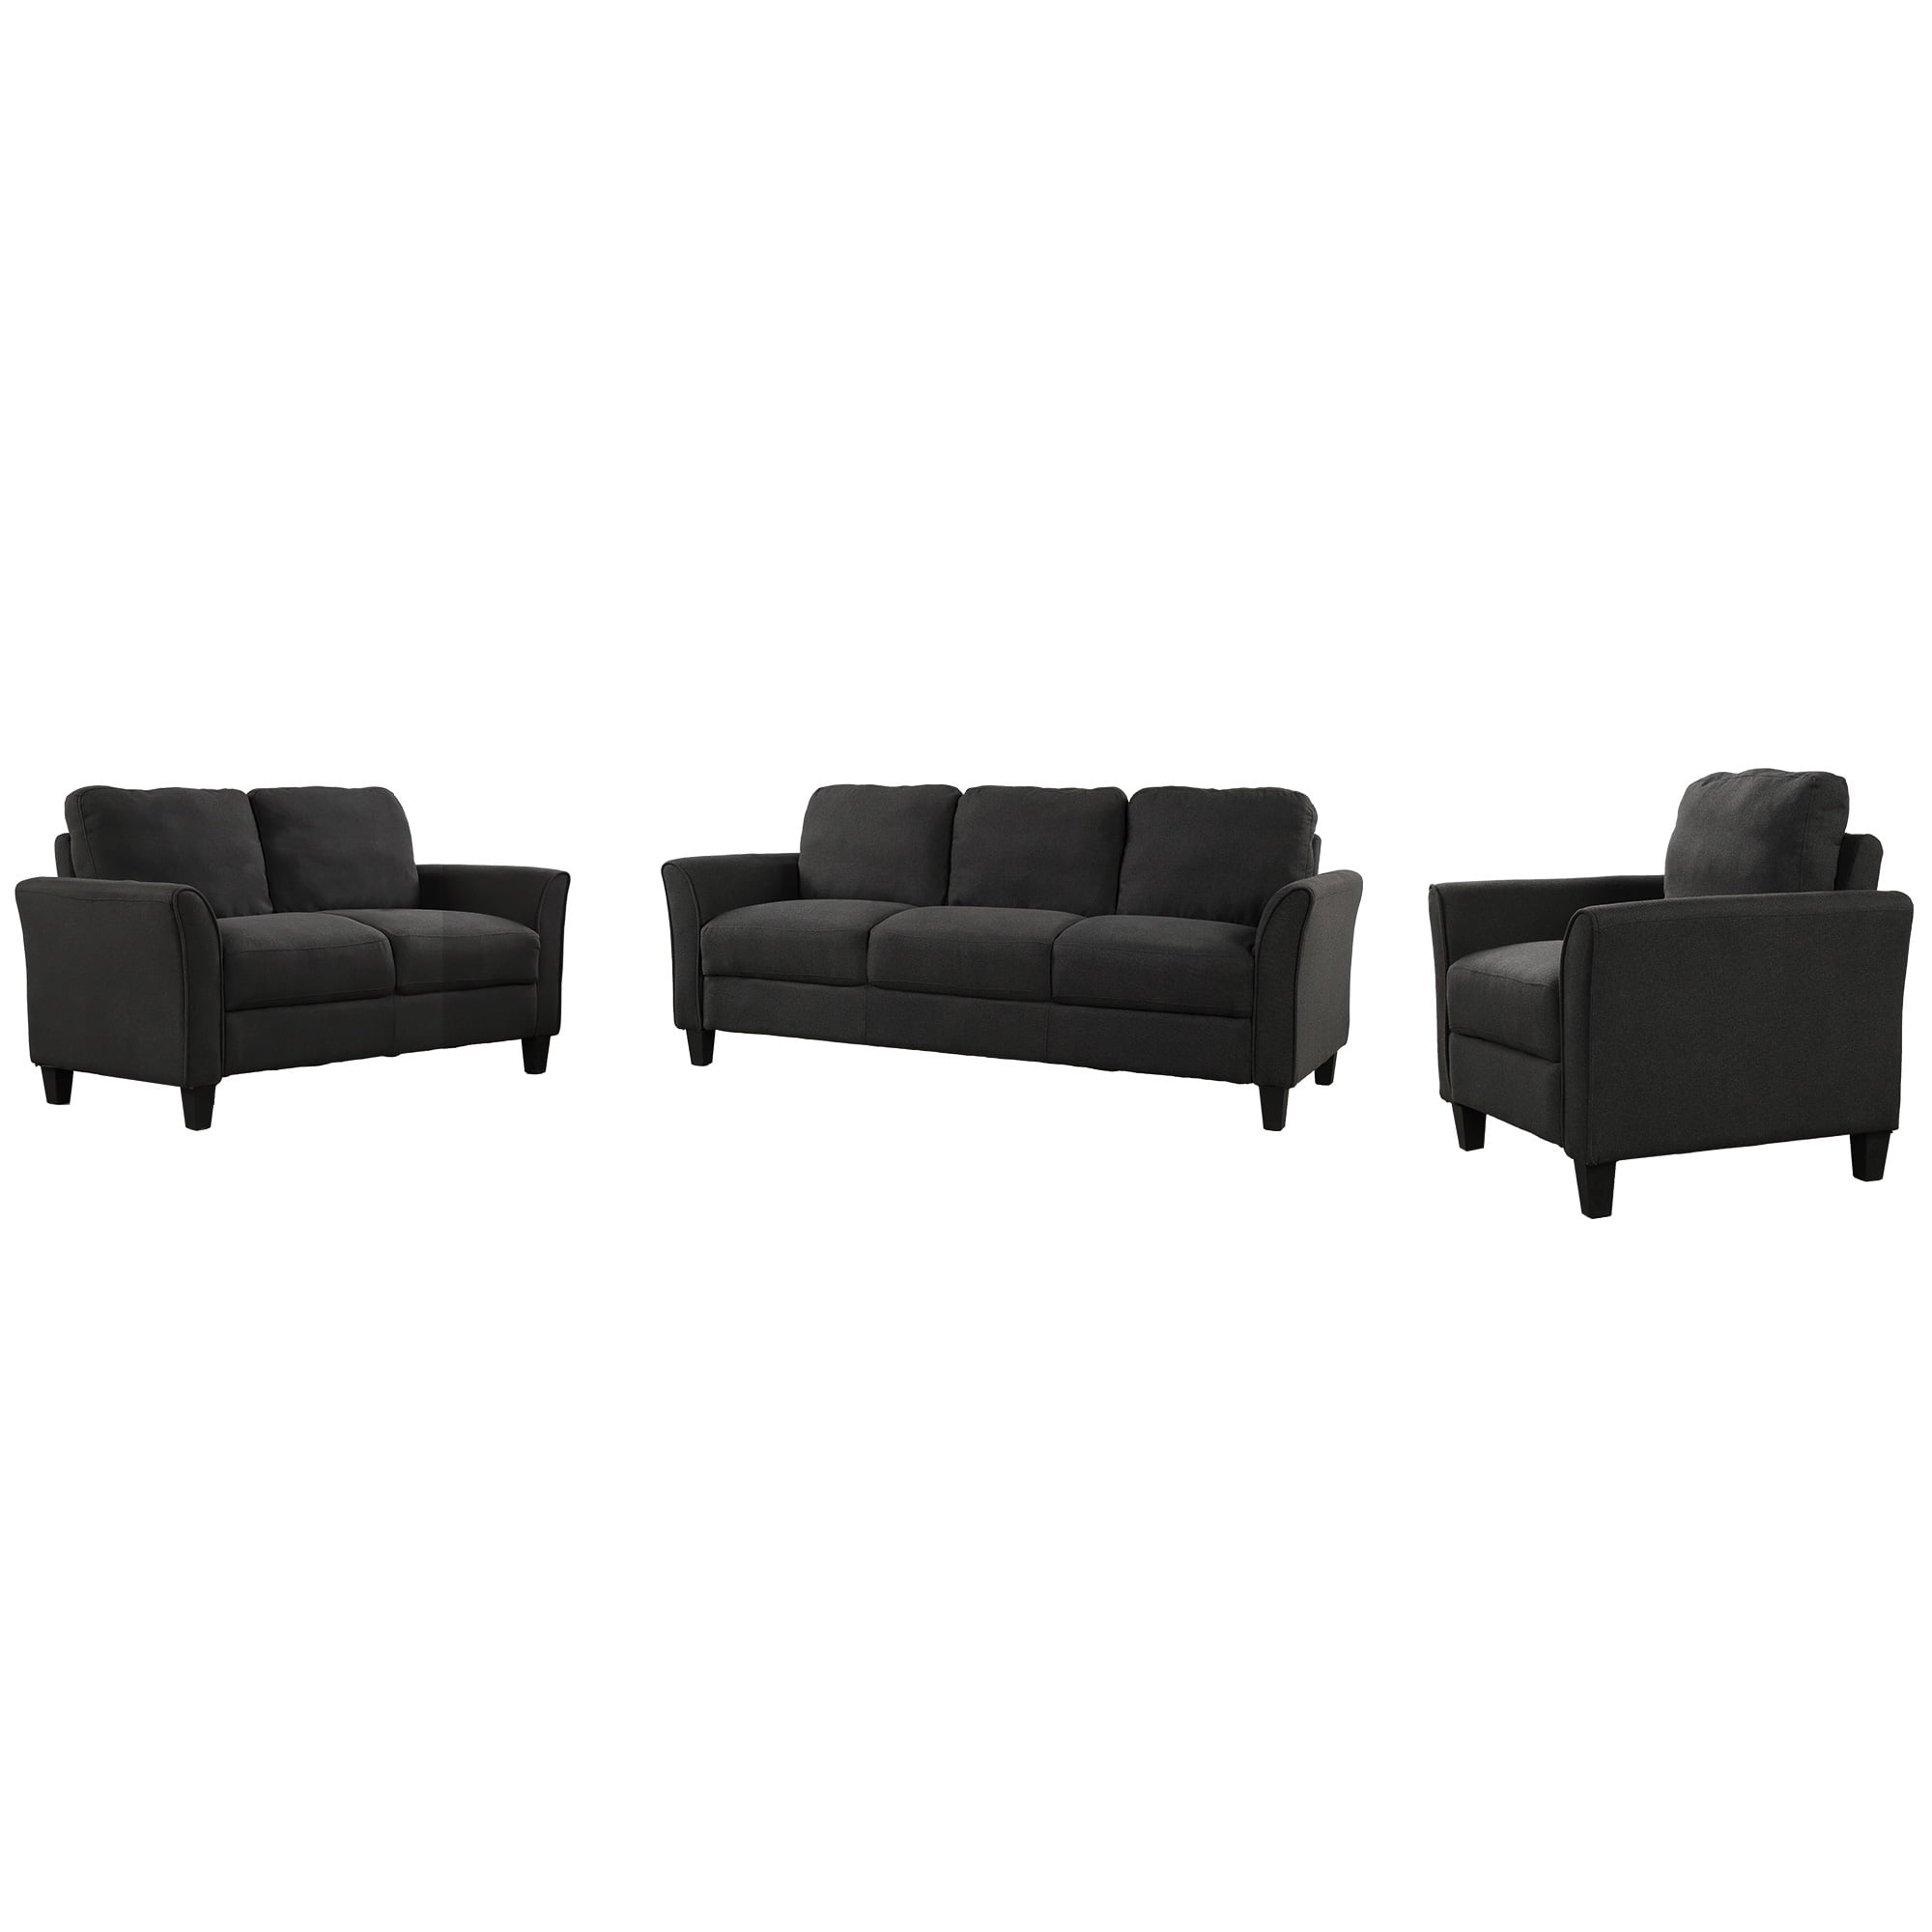 Armchair Living Room Furniture Sofa, Sectional Sofa With Removable Back Cushions